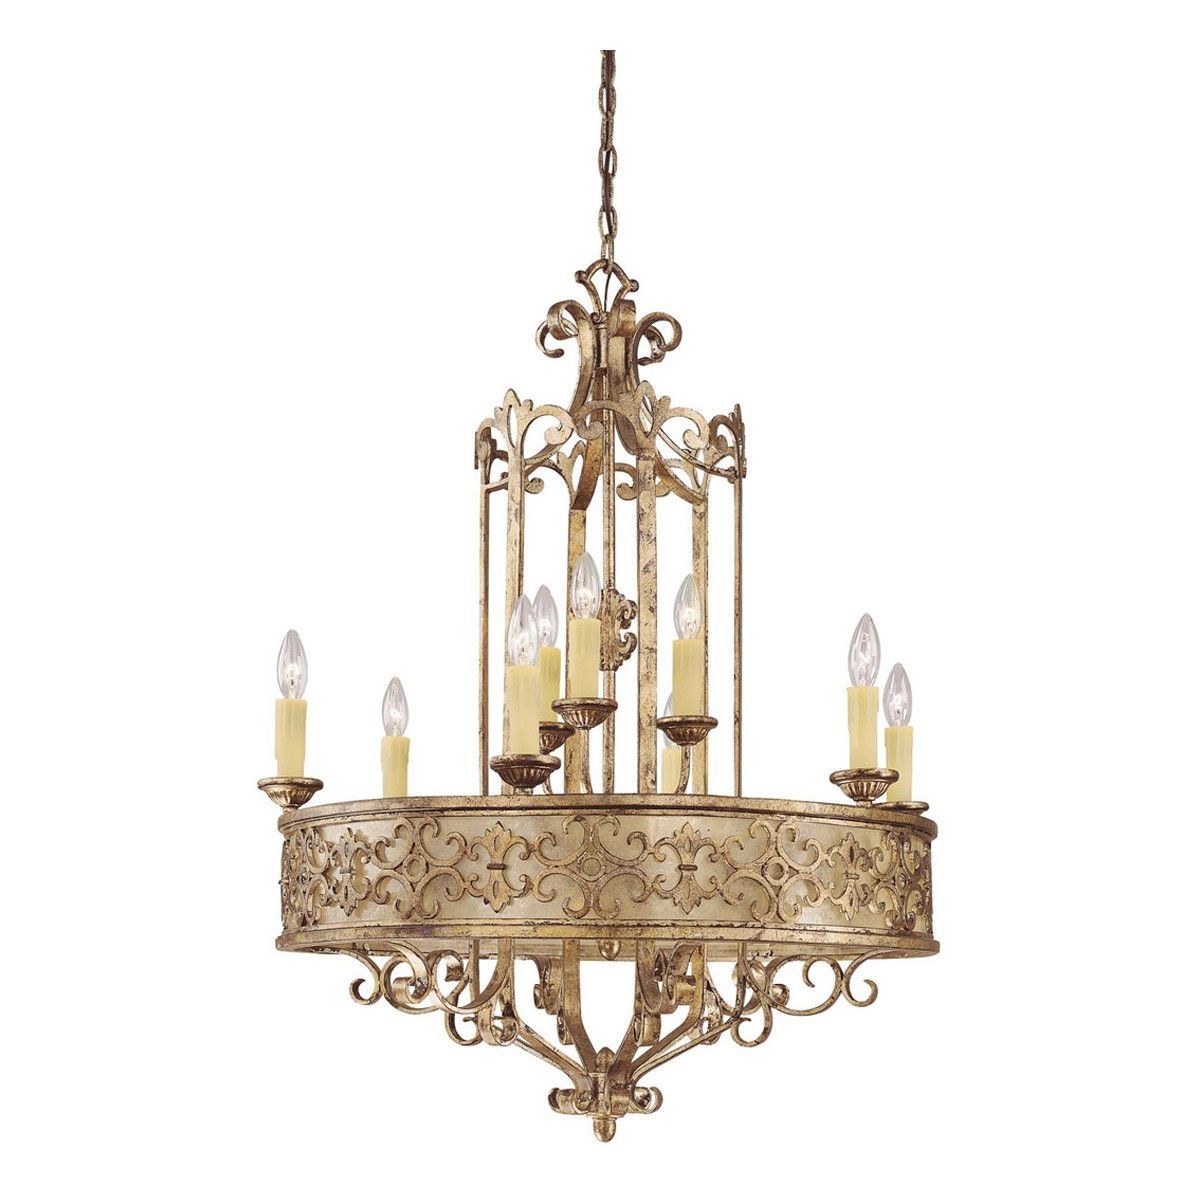 Savonia 9 Light Chandelier Products Pinterest Products Intended For Ornate Chandeliers (View 11 of 12)